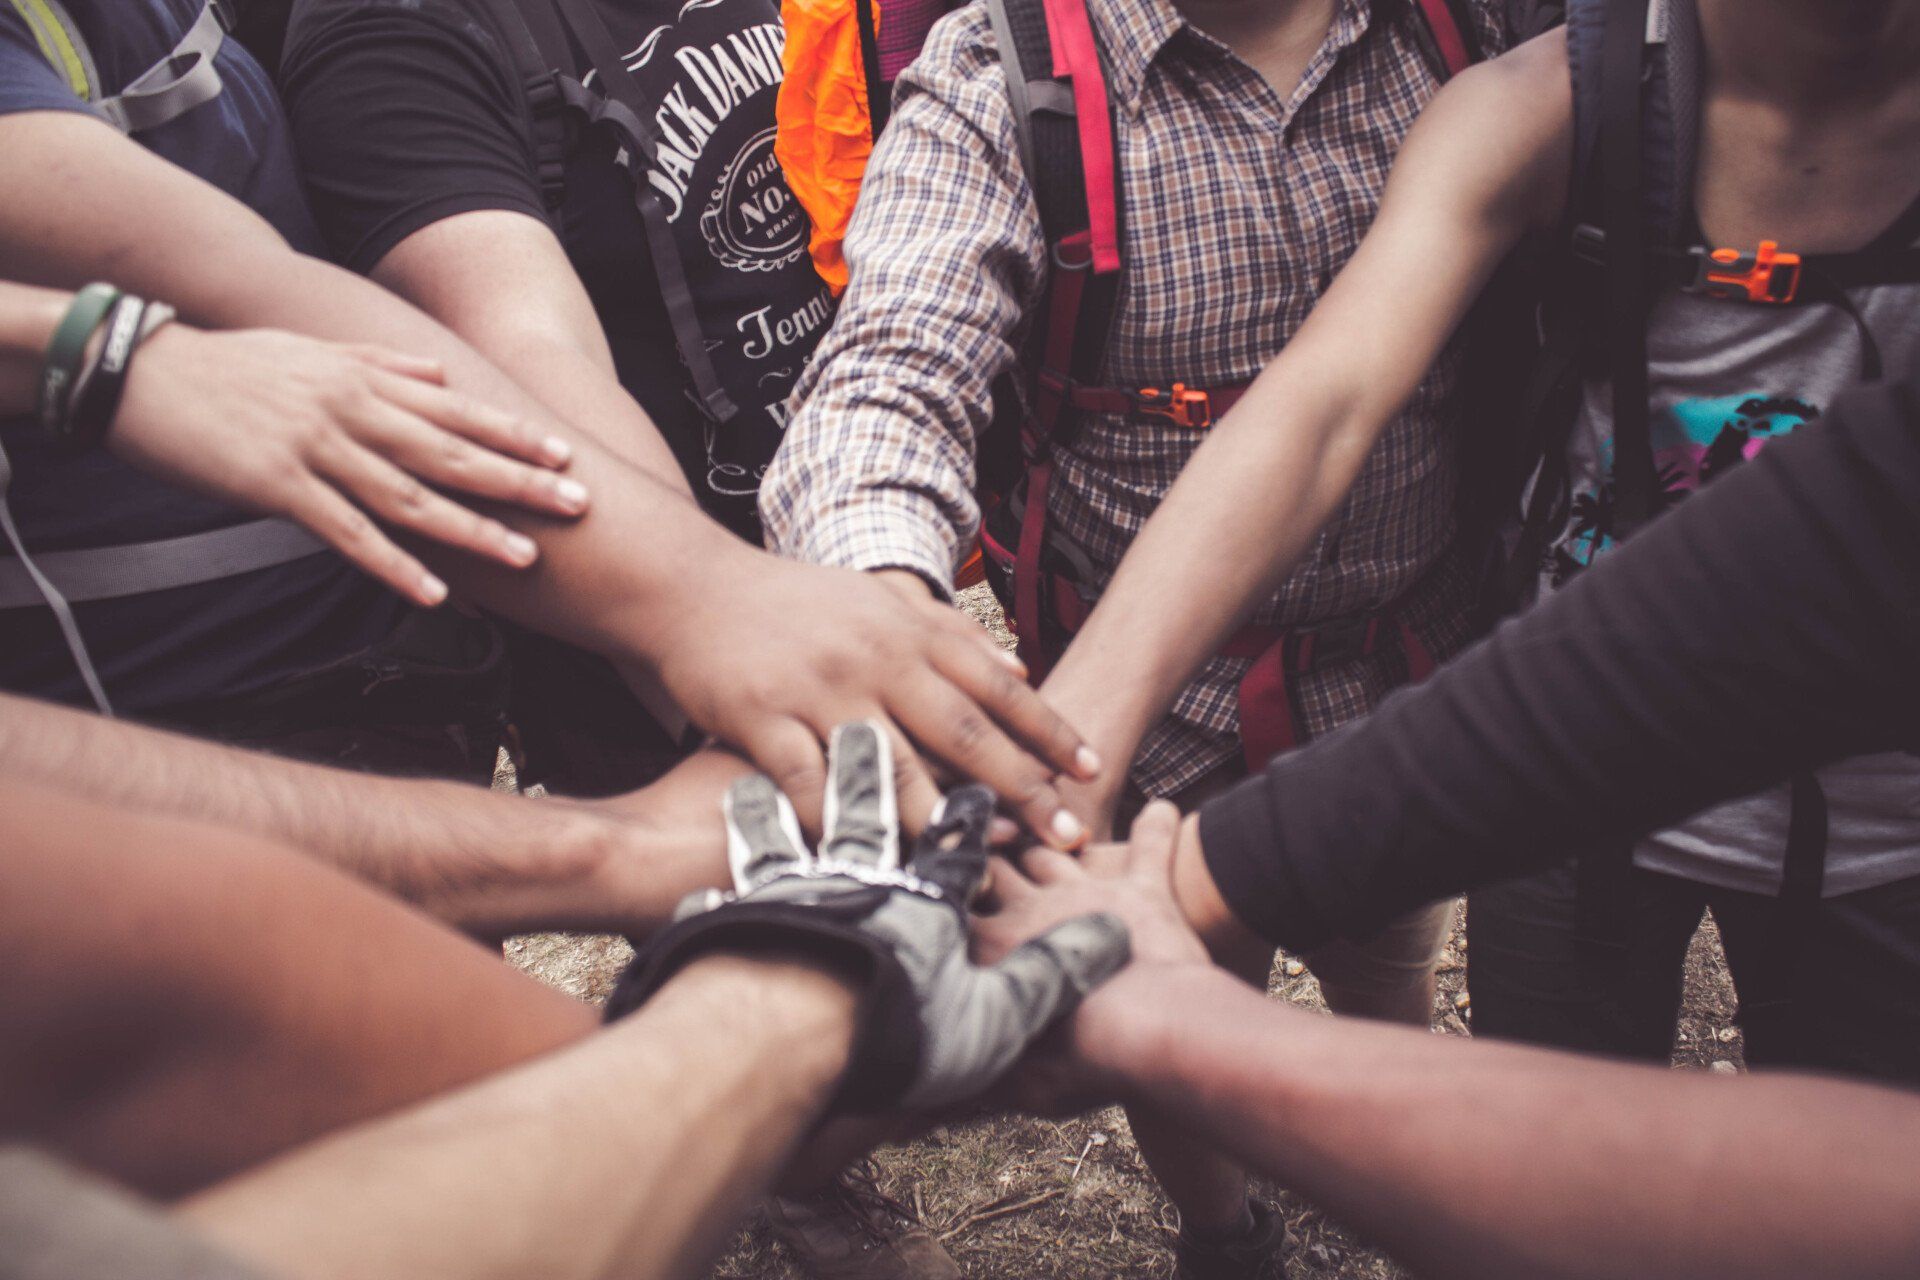 A group of people are putting their hands together in a circle.